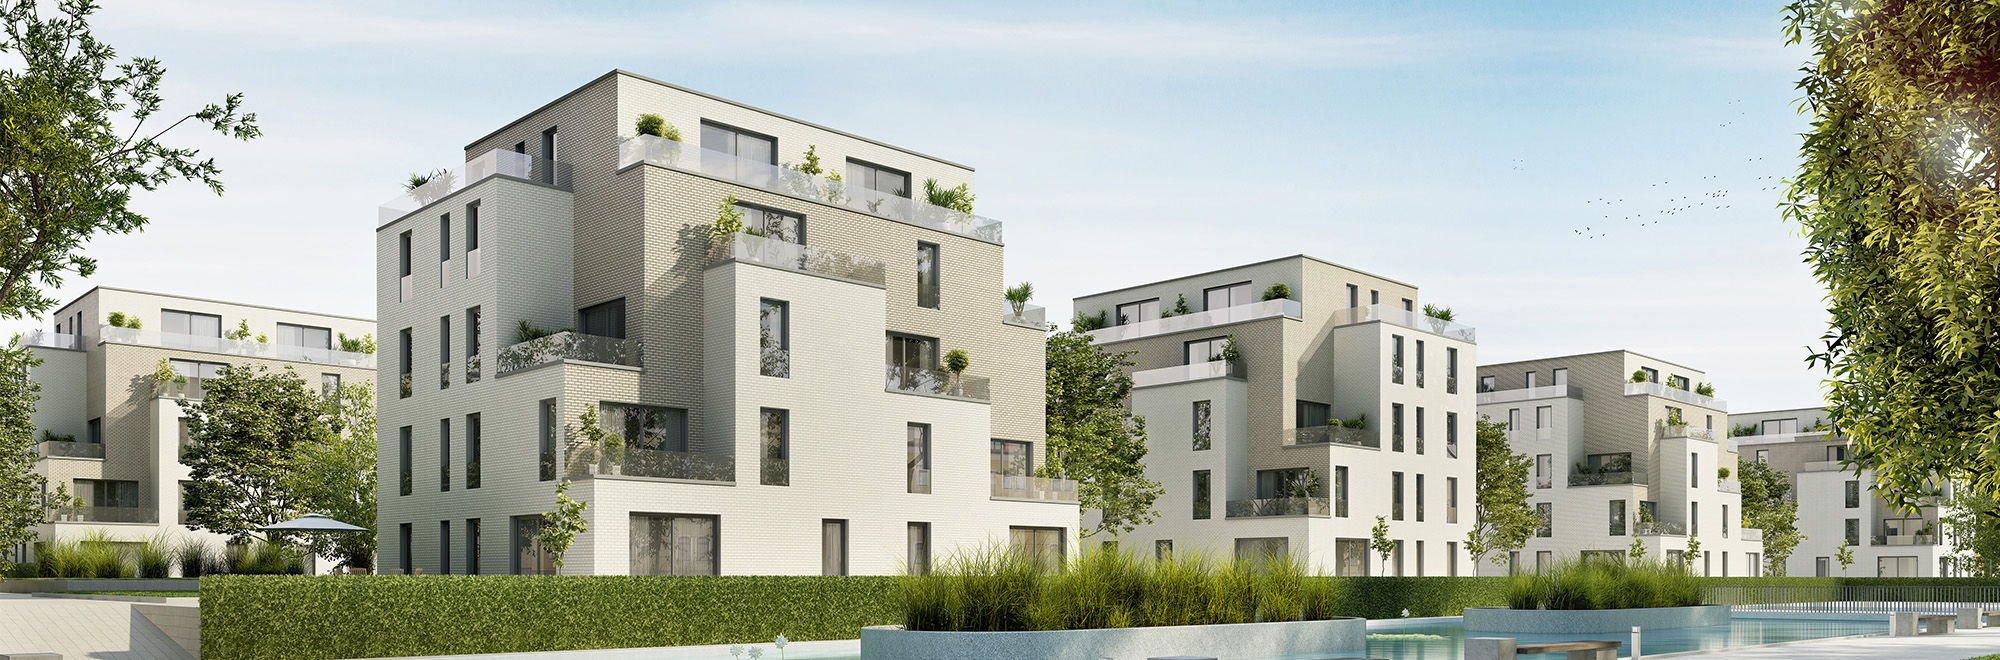 NG Immobilier